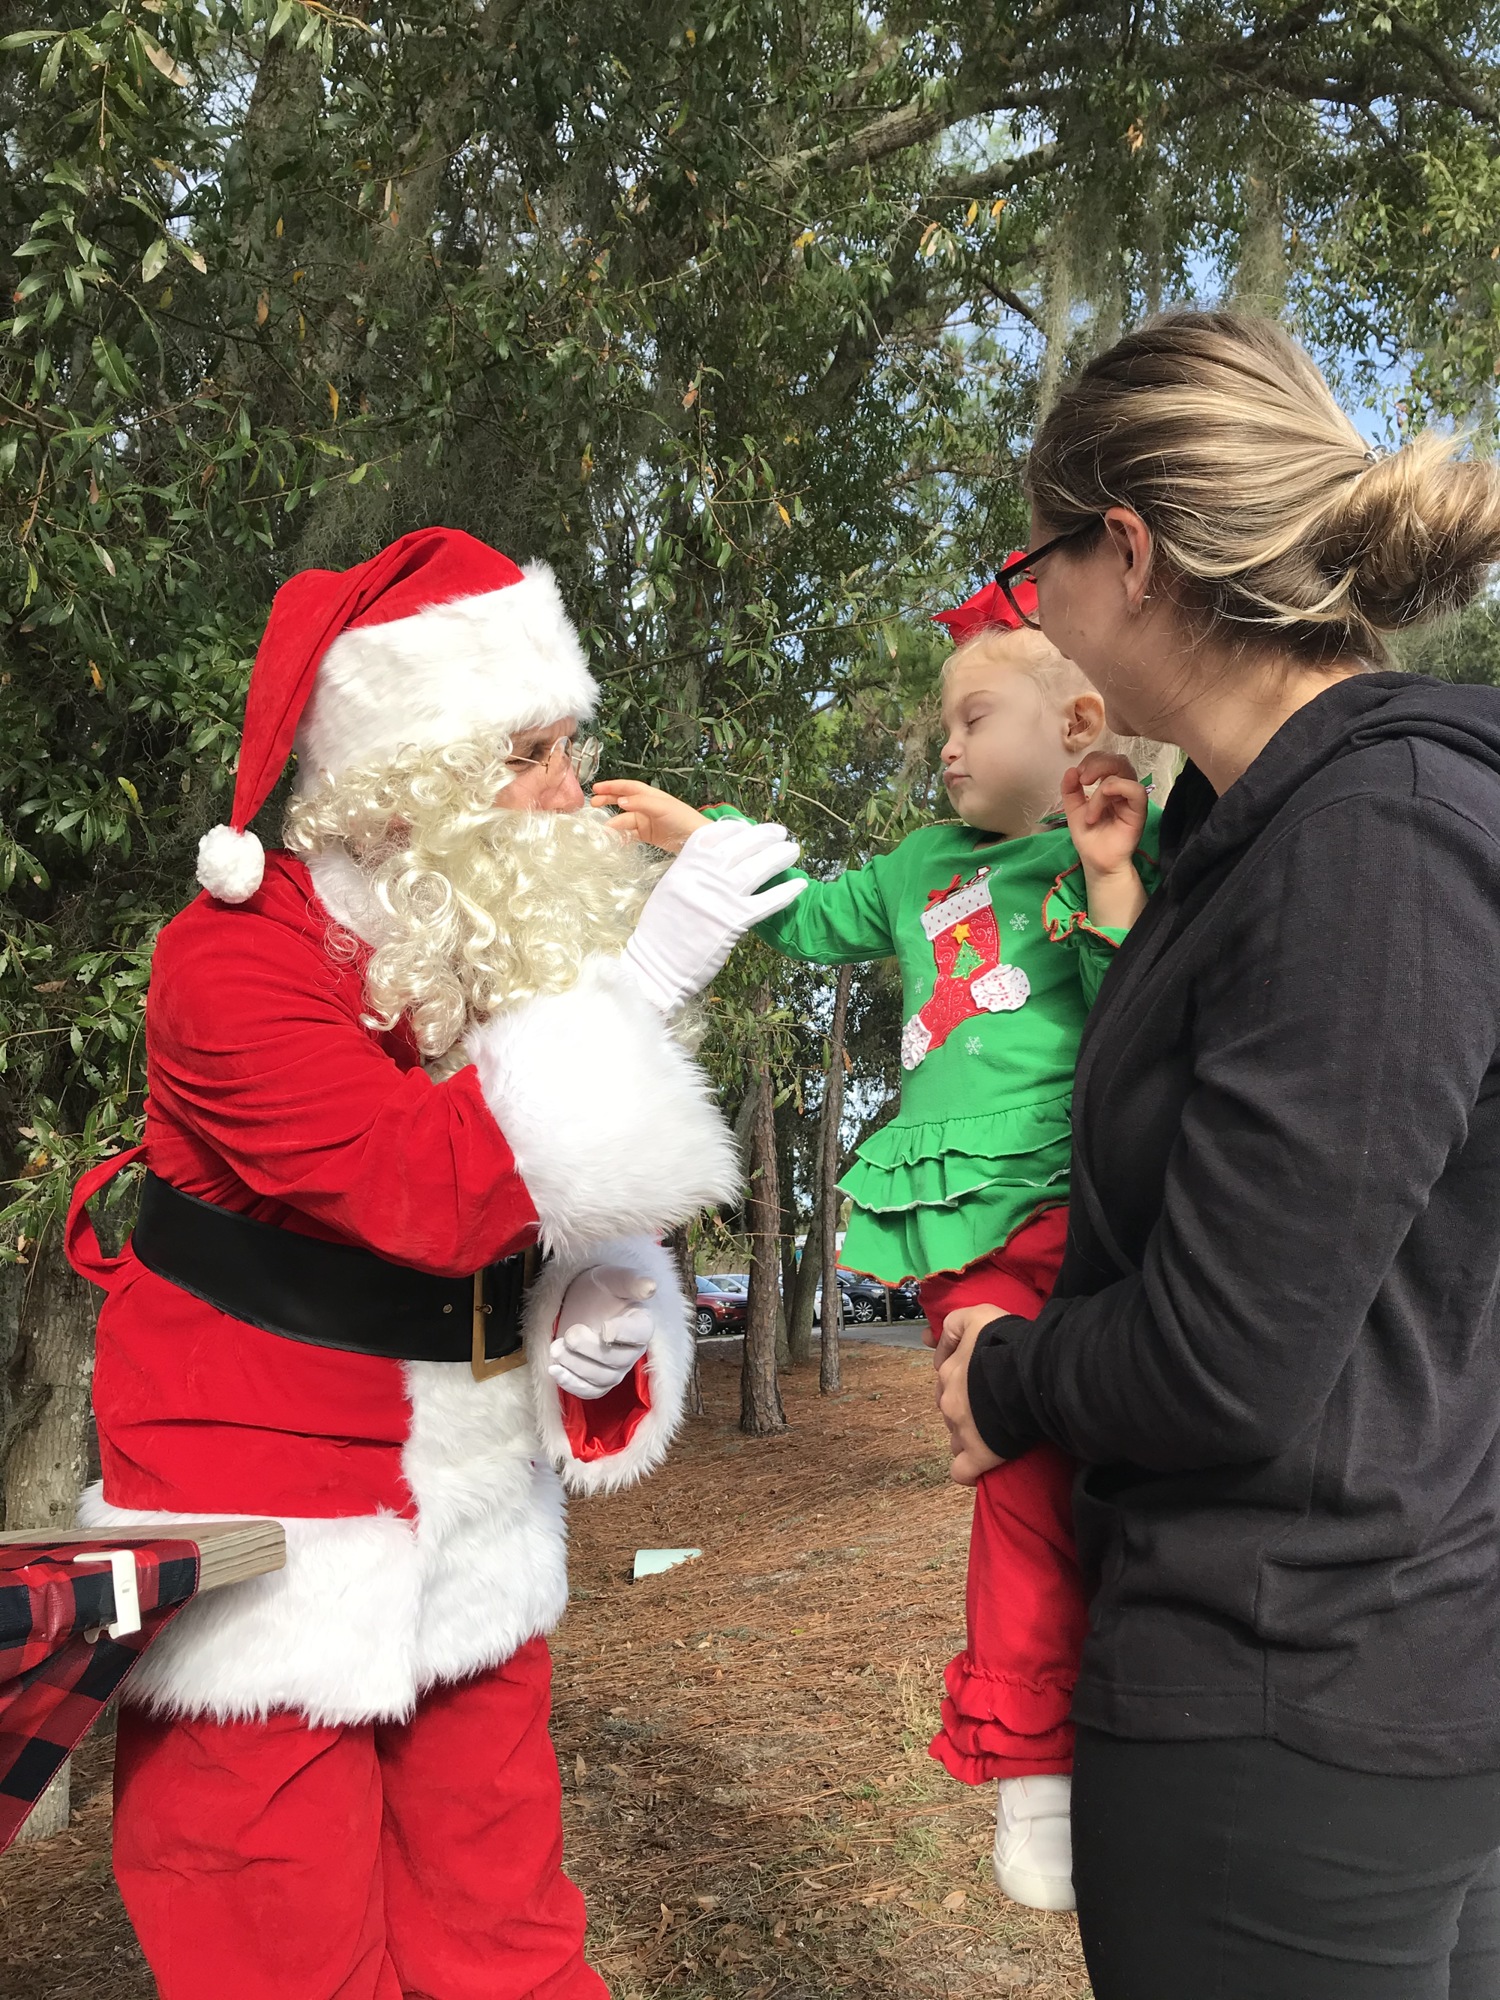 Longboat Key Fire Chief Paul Dezzi, dressed as Santa Claus, greets Lili Michel while Lili's mother, Katrina, holds her on Dec. 21 at Nathan Benderson Park.